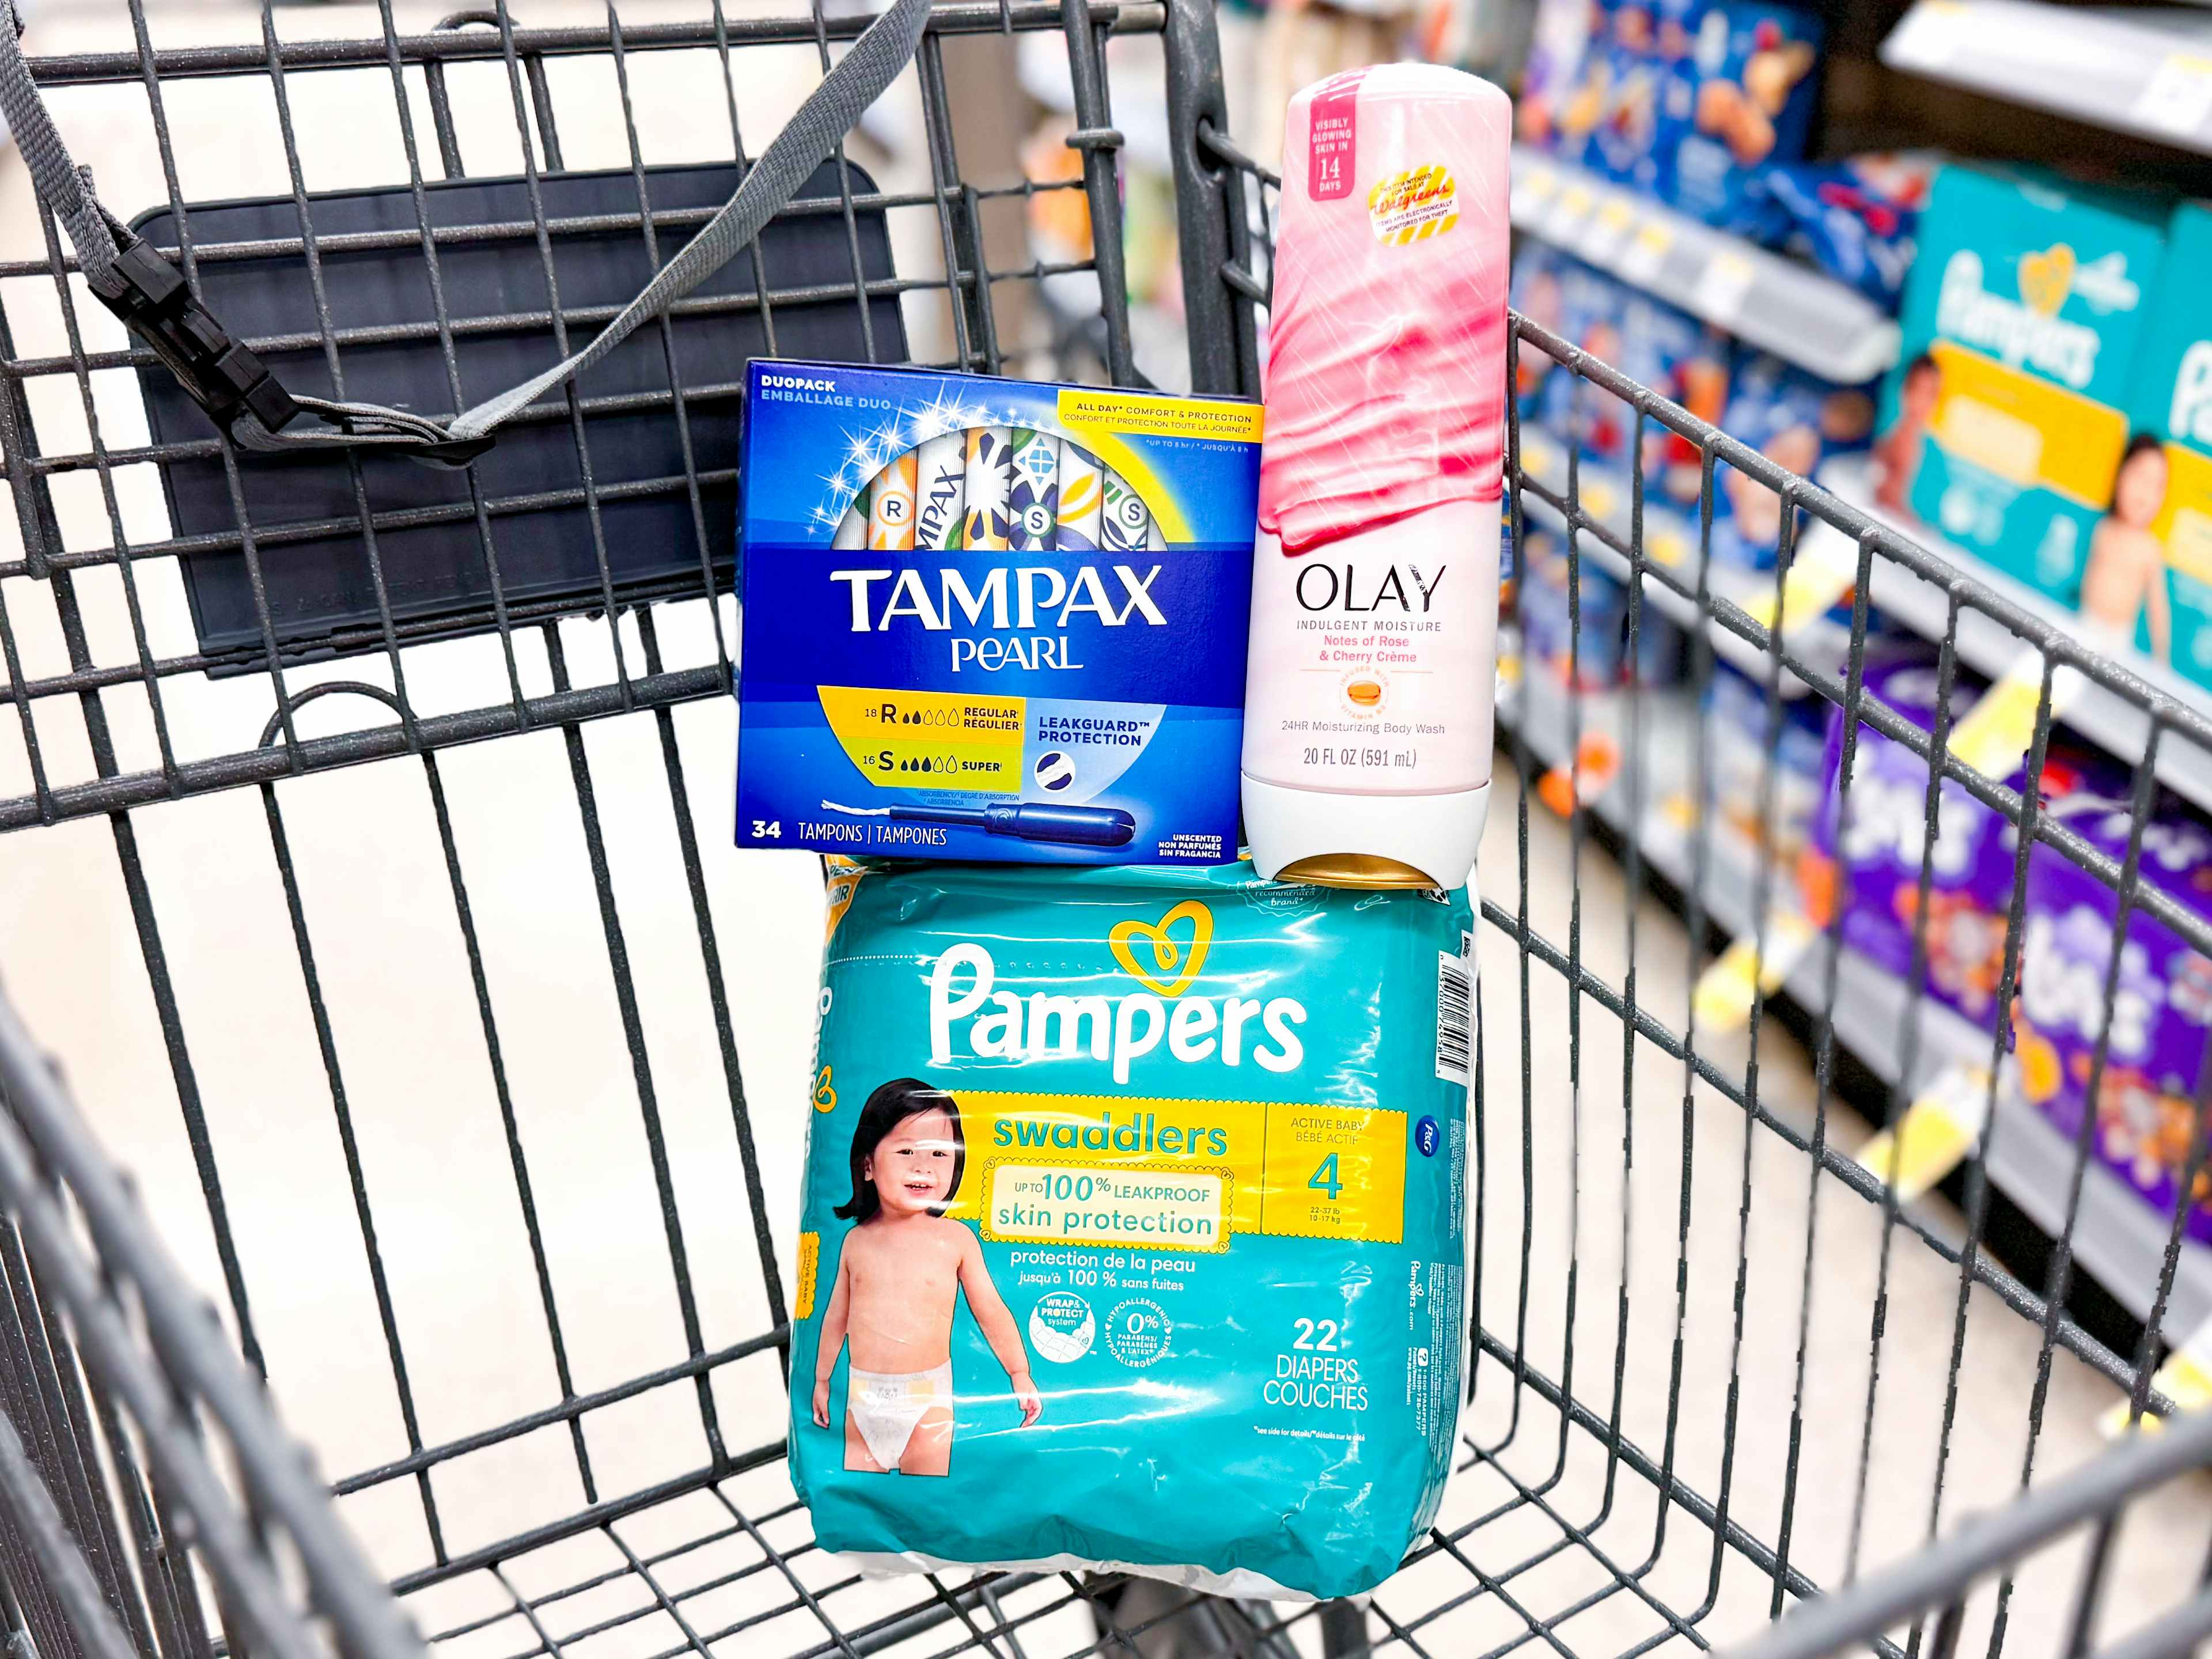 walgreens-pampers-olay-tampax31